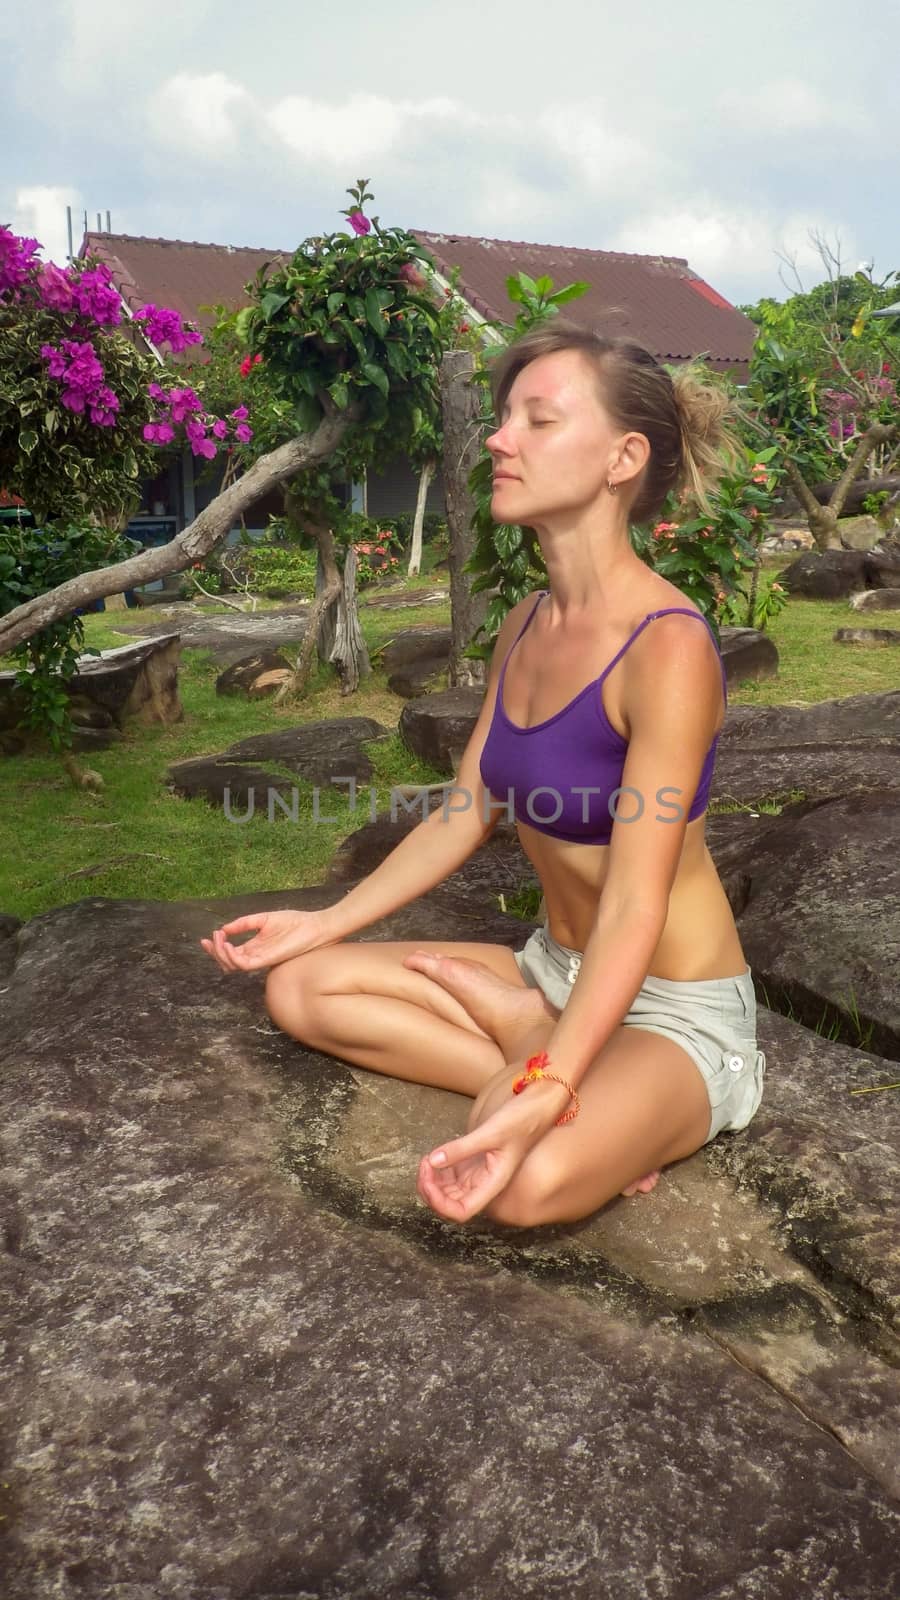 a young woman sitting in yoga lotus pose meditation outdoors